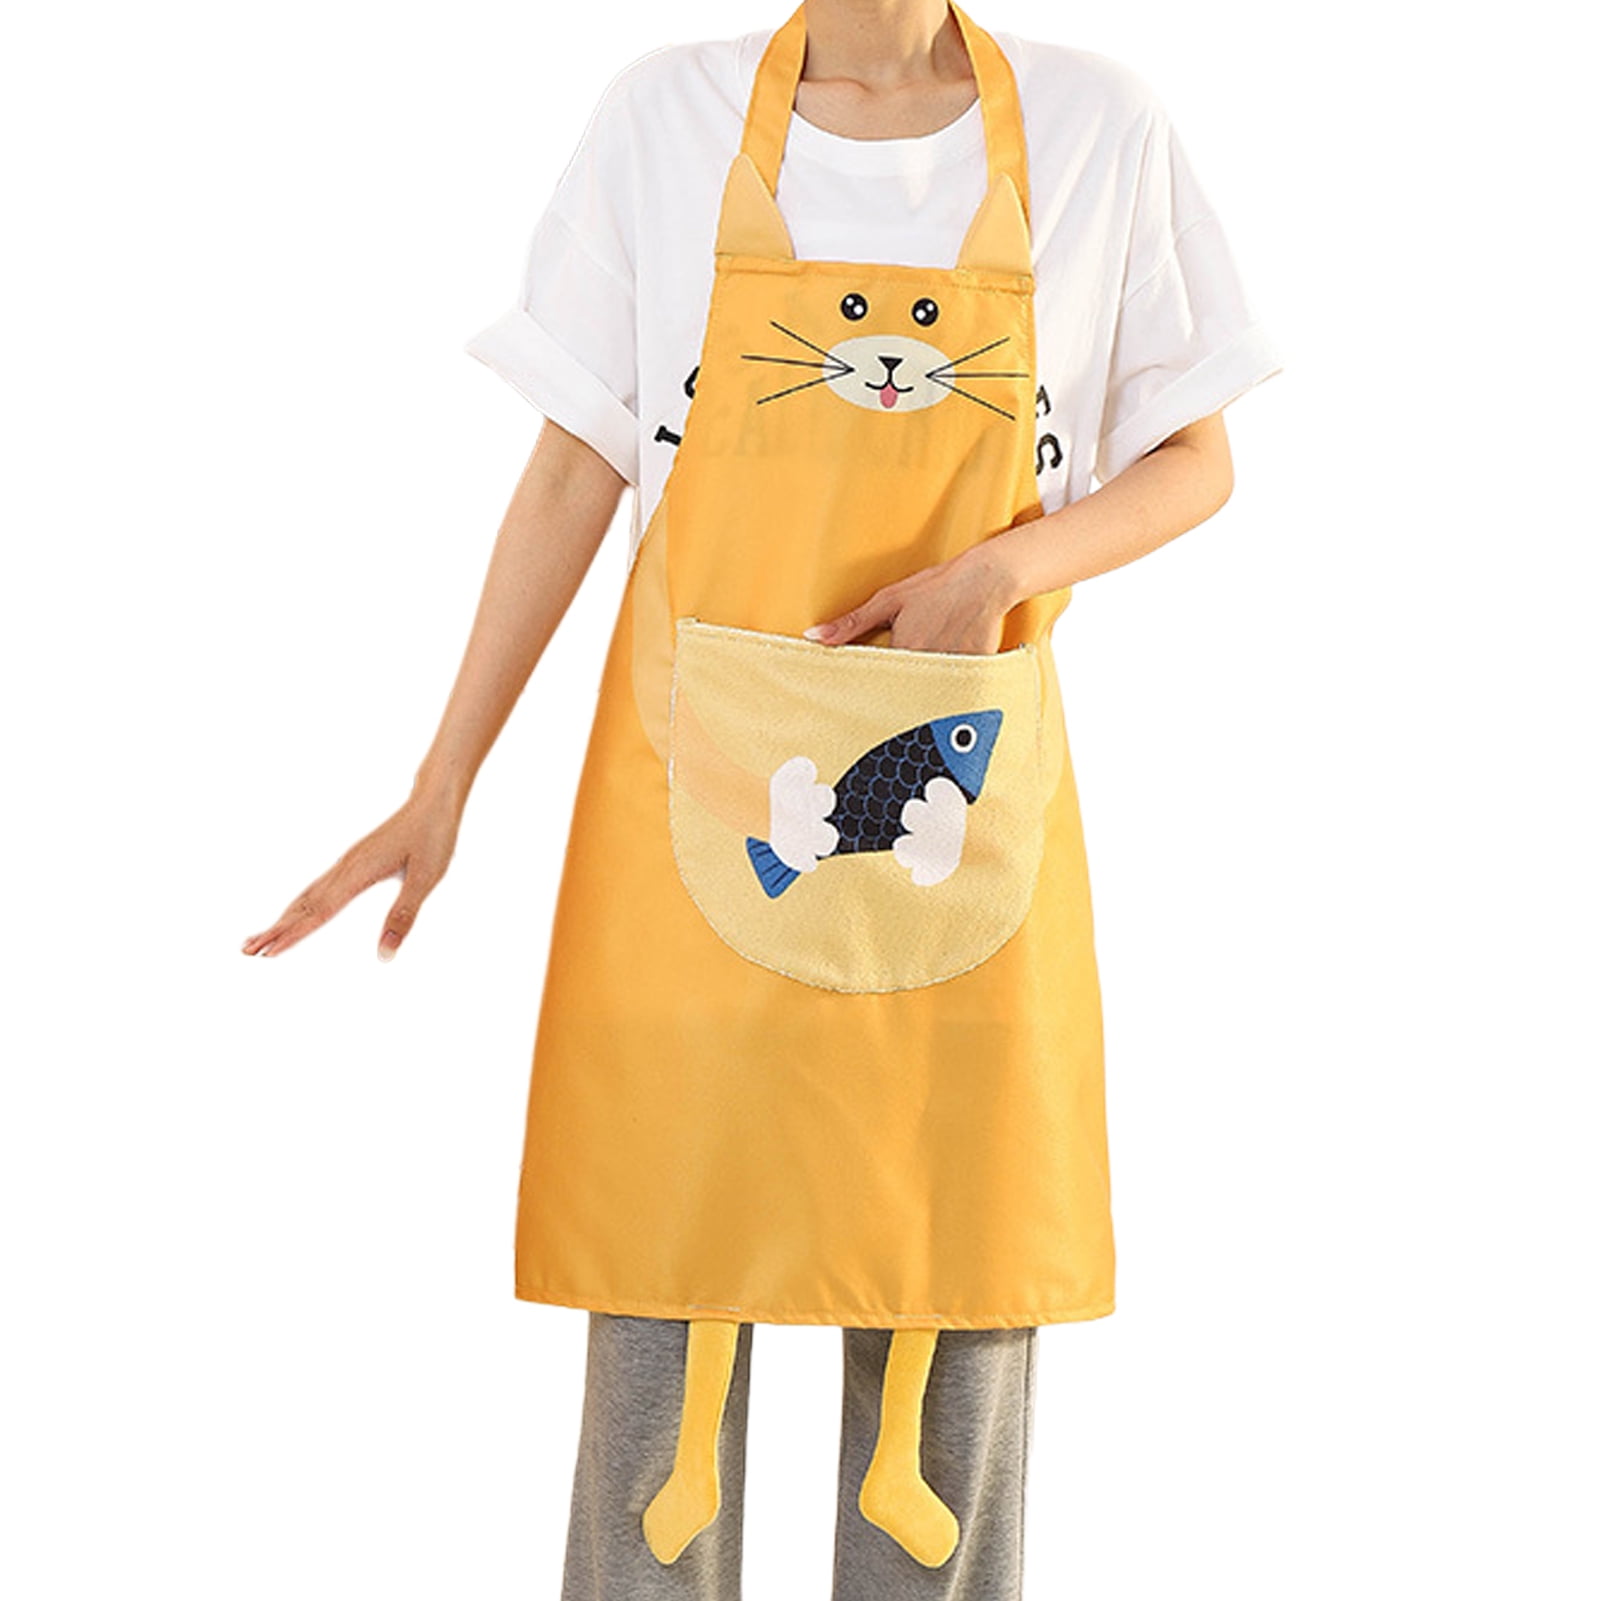 3pcs Waterproof Apron Kitchen Restaurant Oilproof Cooking Apron with Pocket 